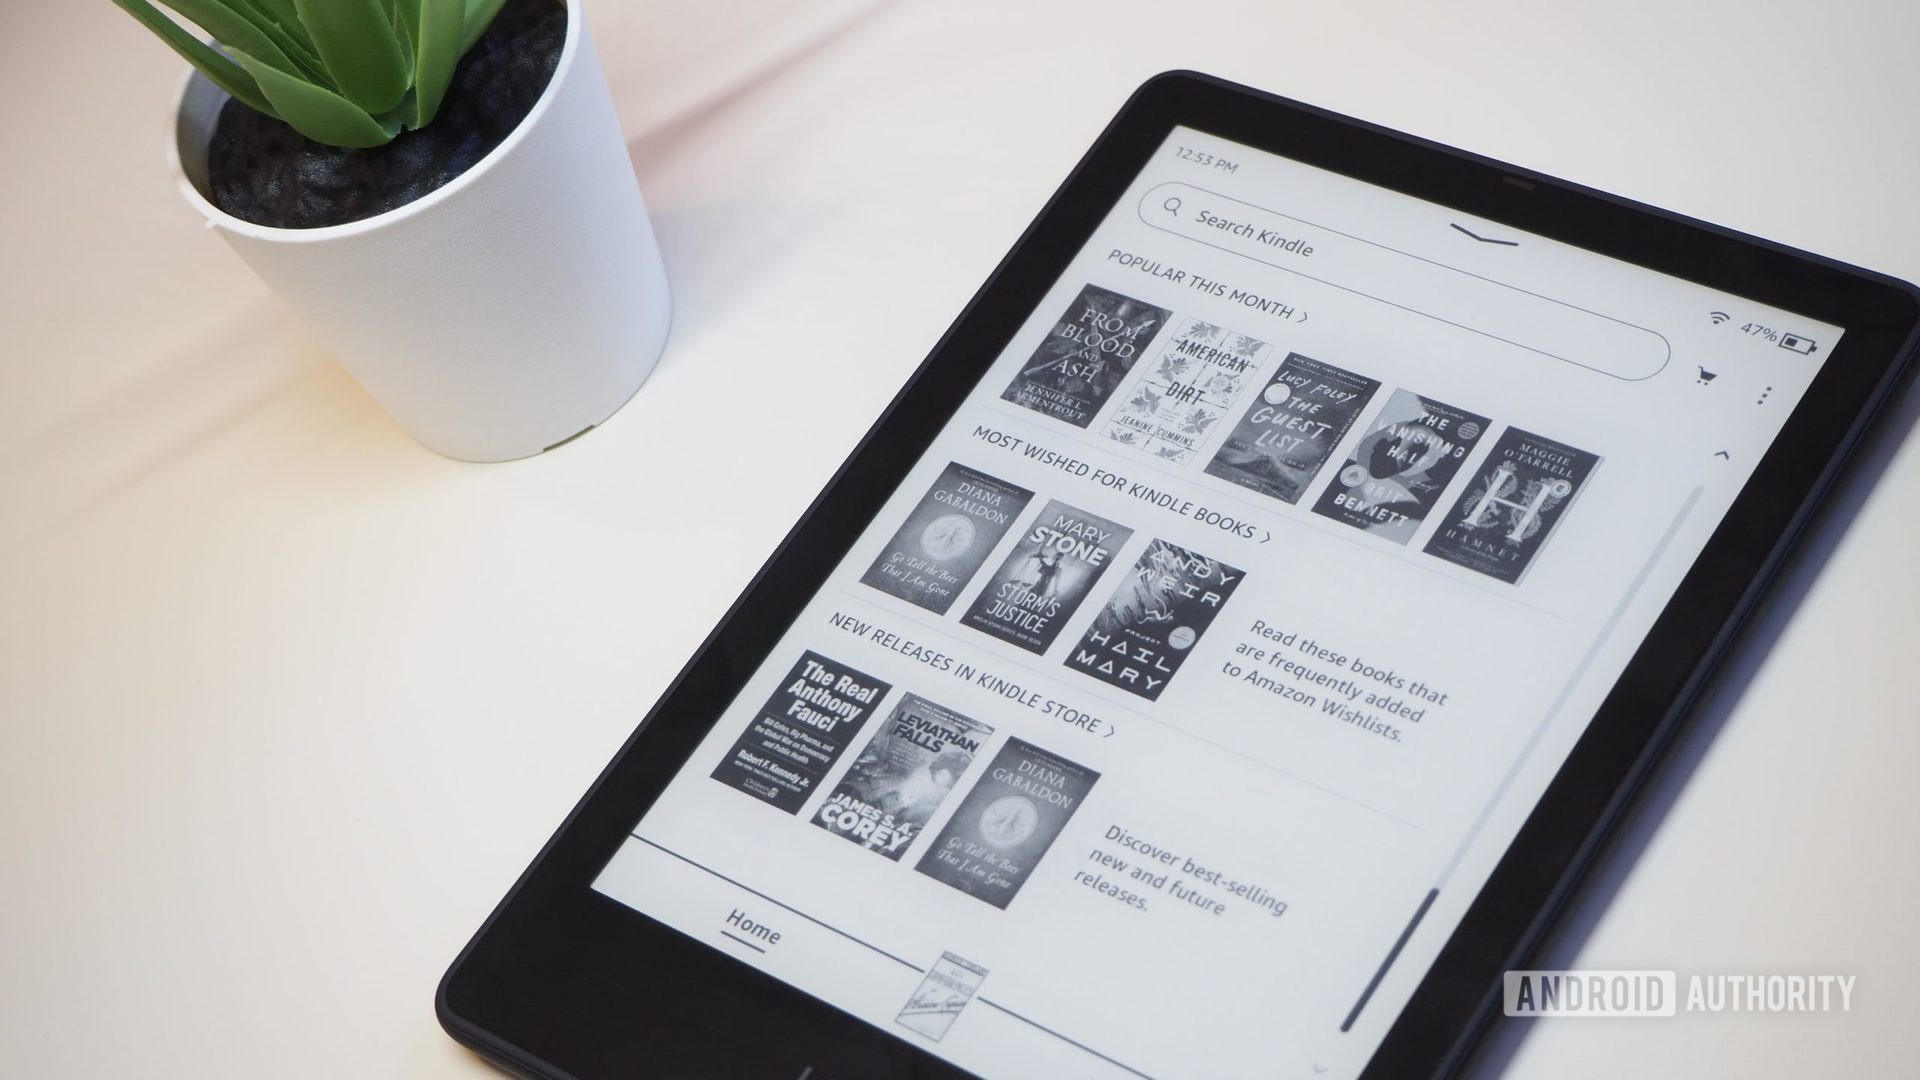 Amazon Kindle Paperwhite 2021 with the screen showing recommended books